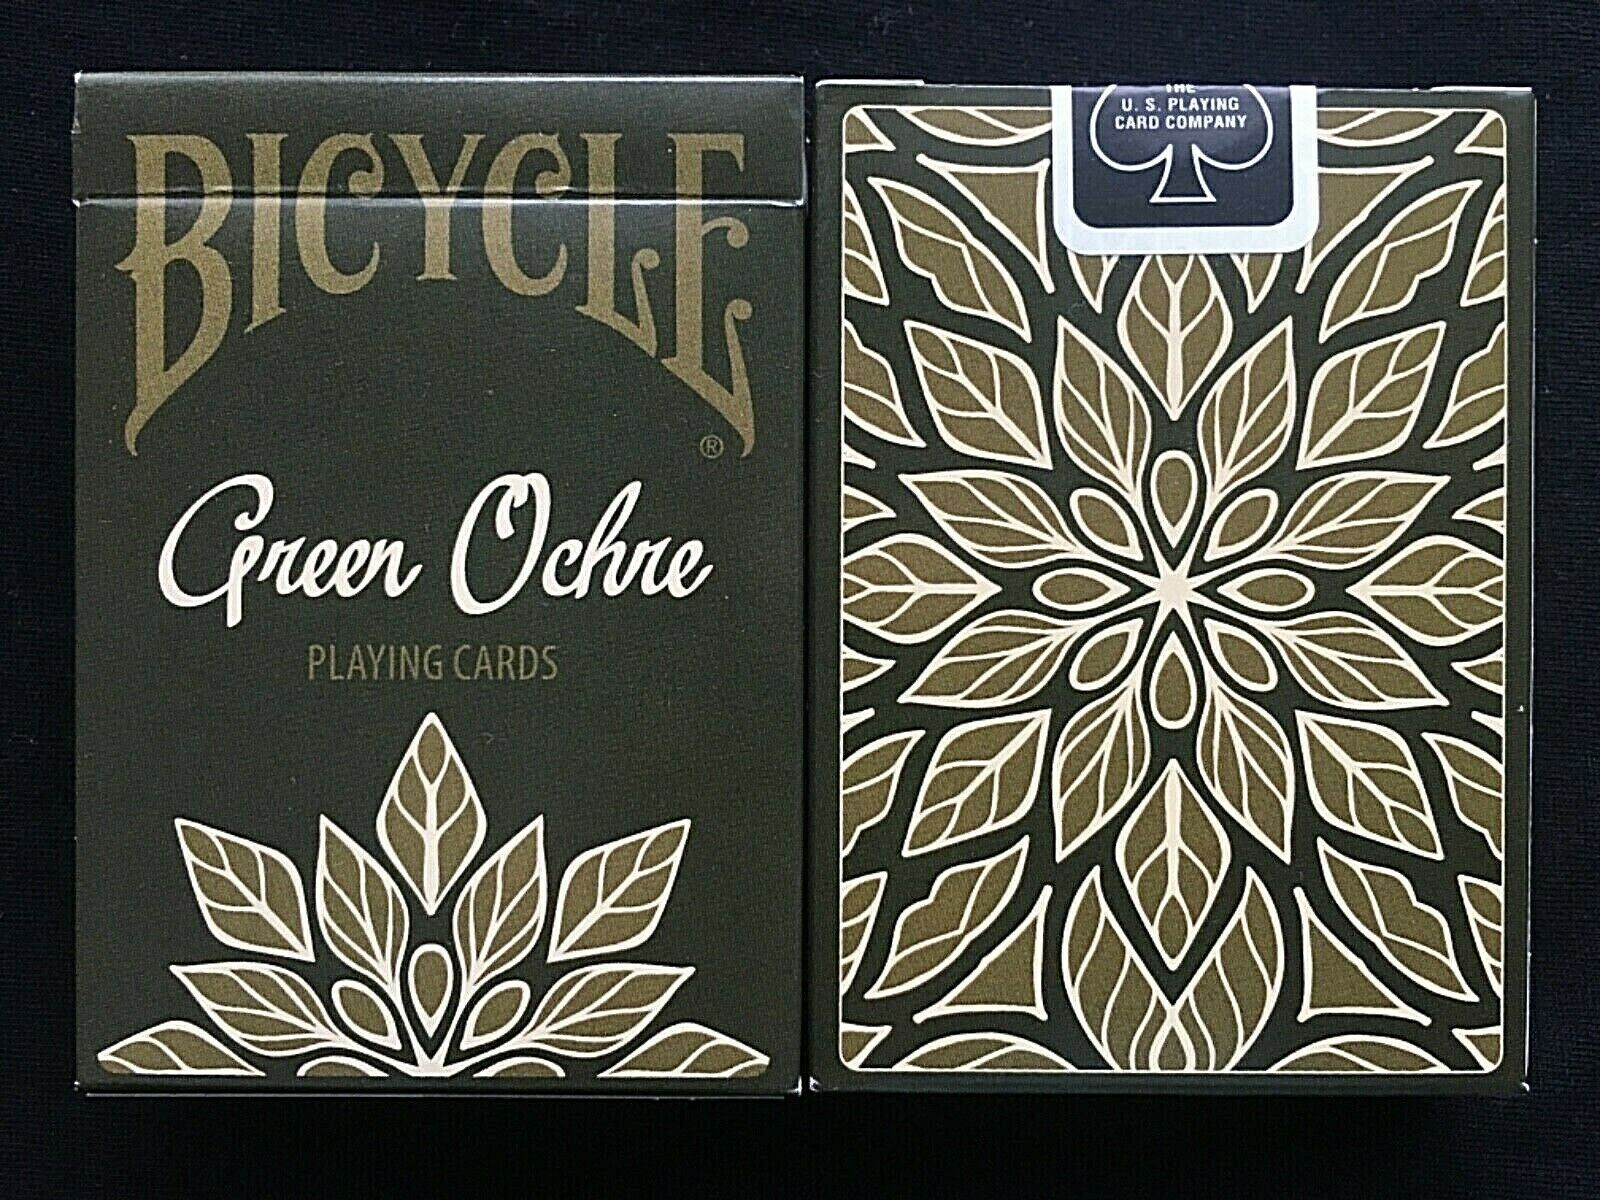 Bicycle Green Ochre - Bicycle Playing Cards , HD Wallpaper & Backgrounds